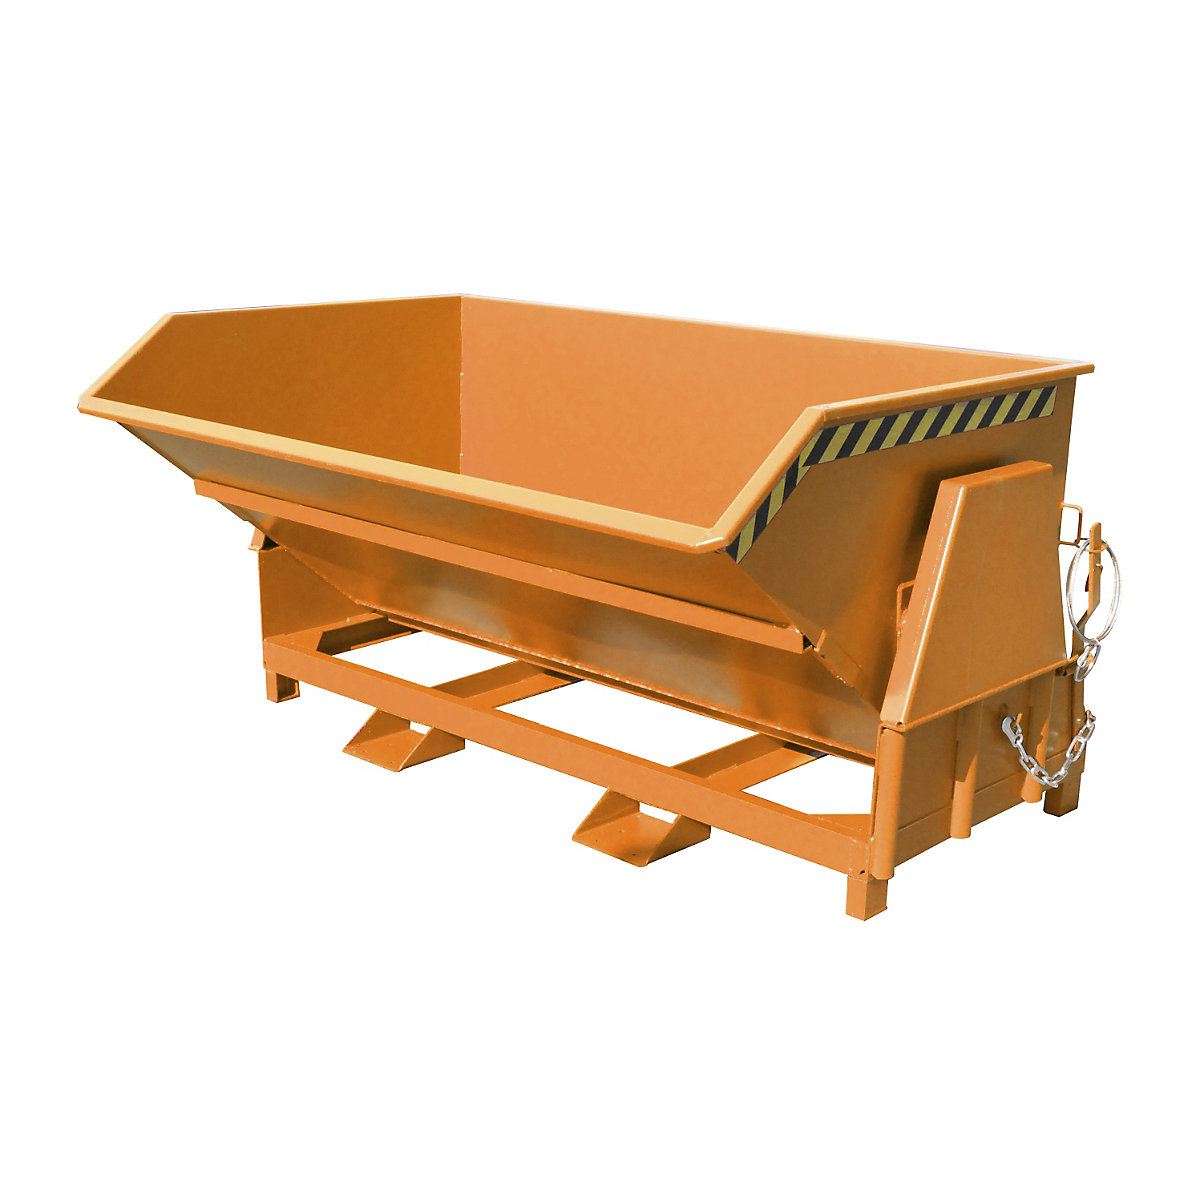 Tilting skip, standard overall height, without wheels – eurokraft pro, capacity 2.0 m³, painted orange RAL 2000-8